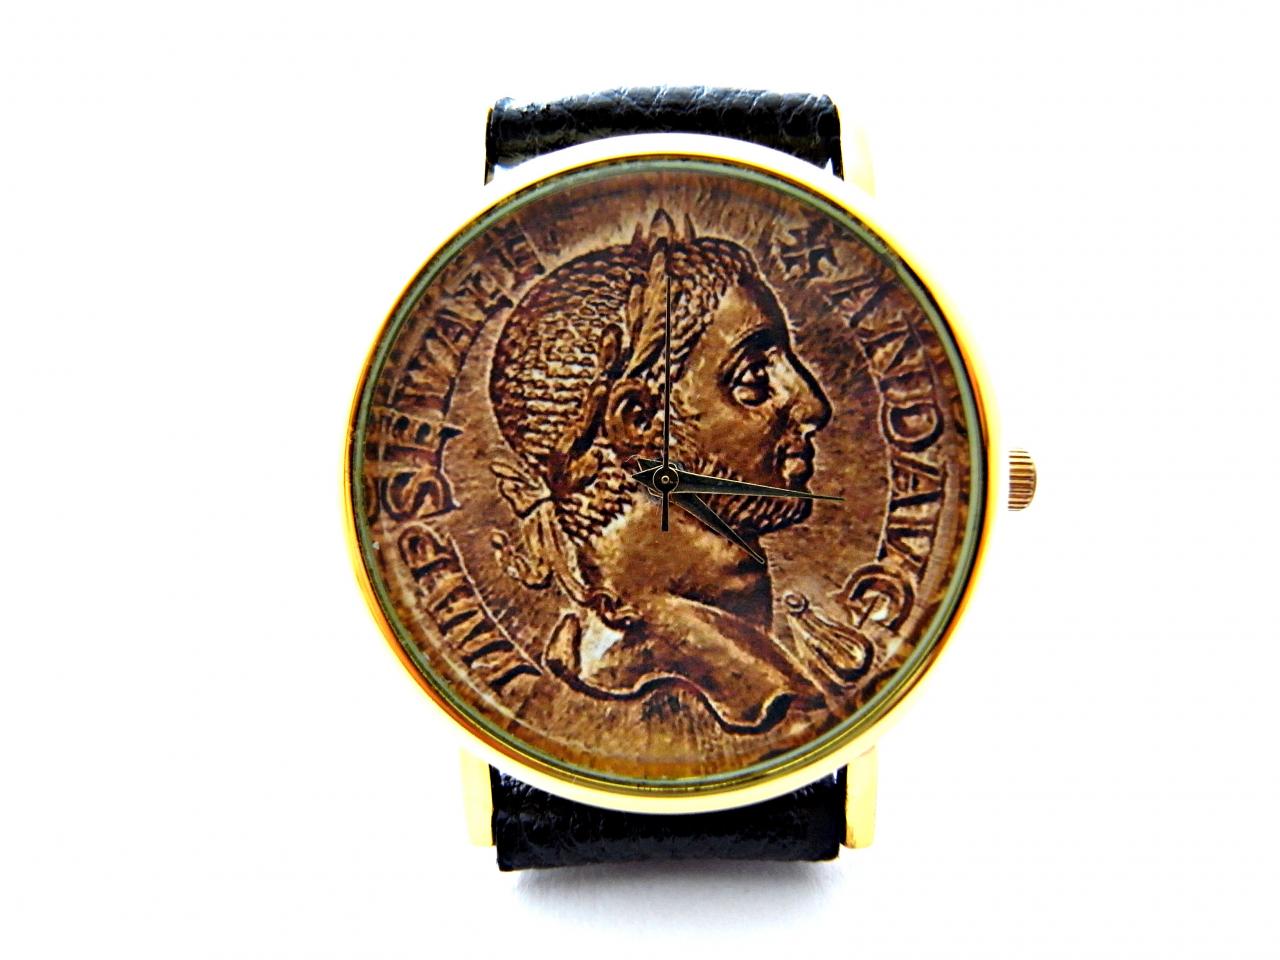 Antique Coin, Old Coin Leather Wrist Watch, Woman Man Lady Unisex Watch, Genuine Leather Handmade Unique Watch #115